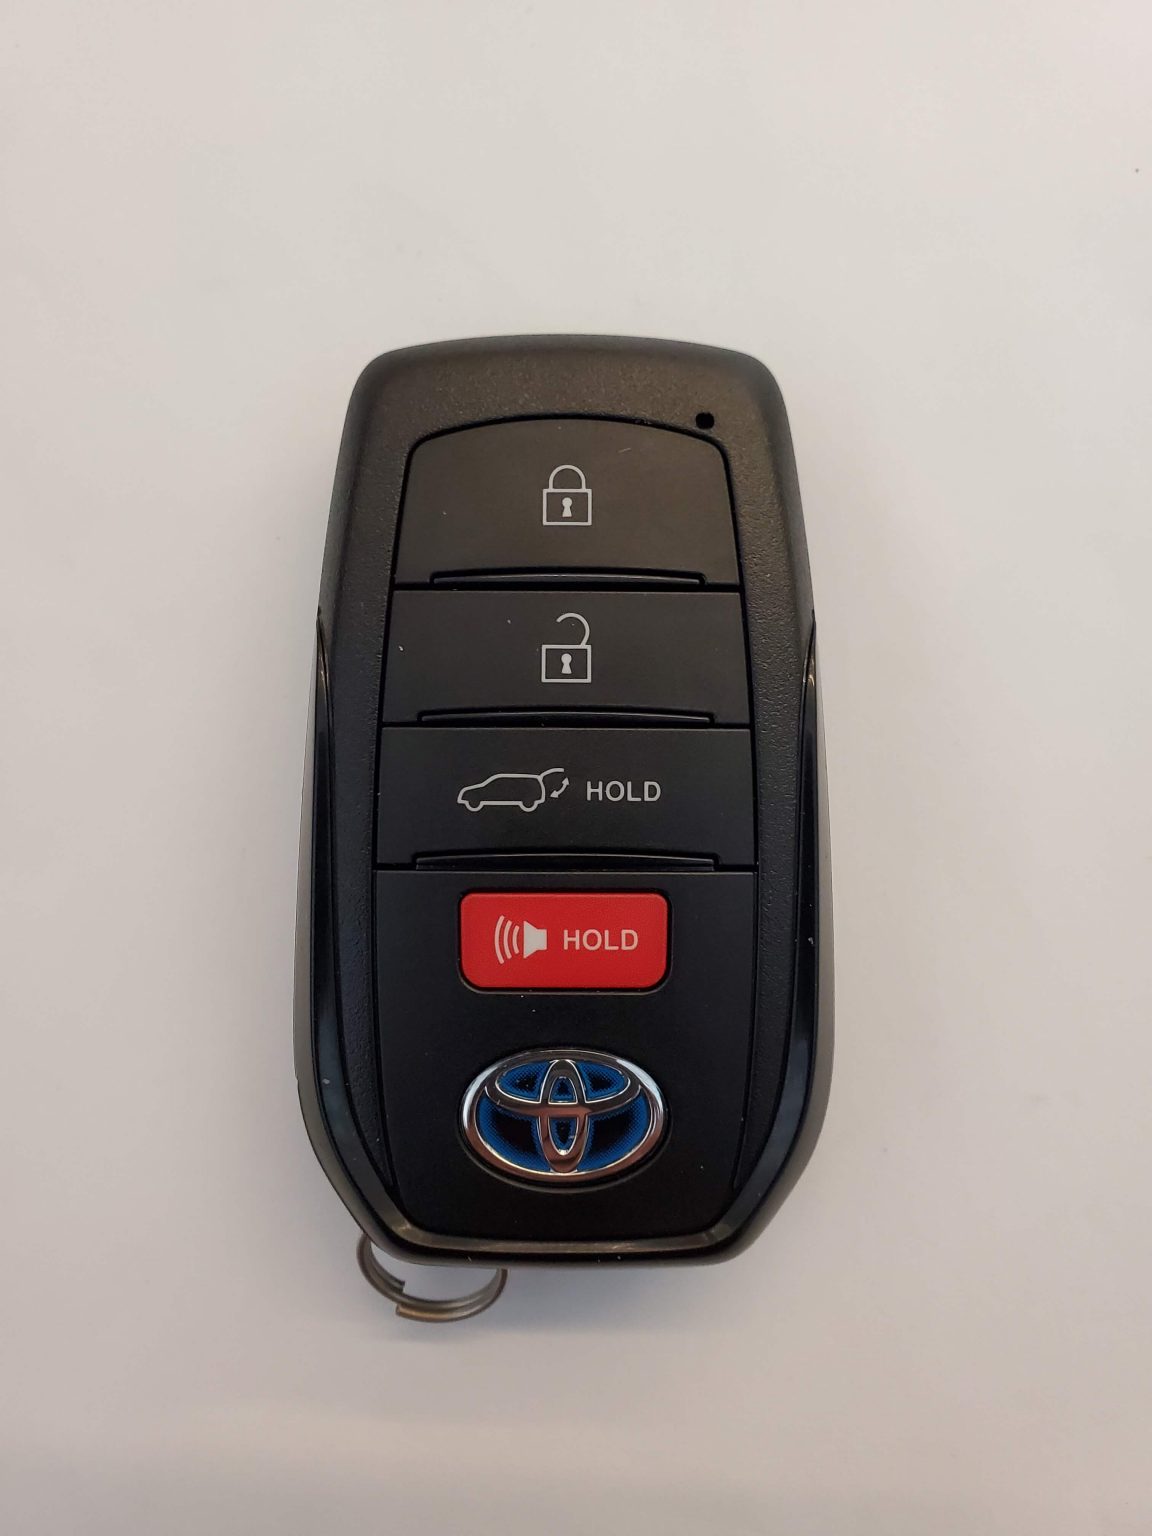 Toyota RAV4 Key Replacement What To Do, Options, Costs & More